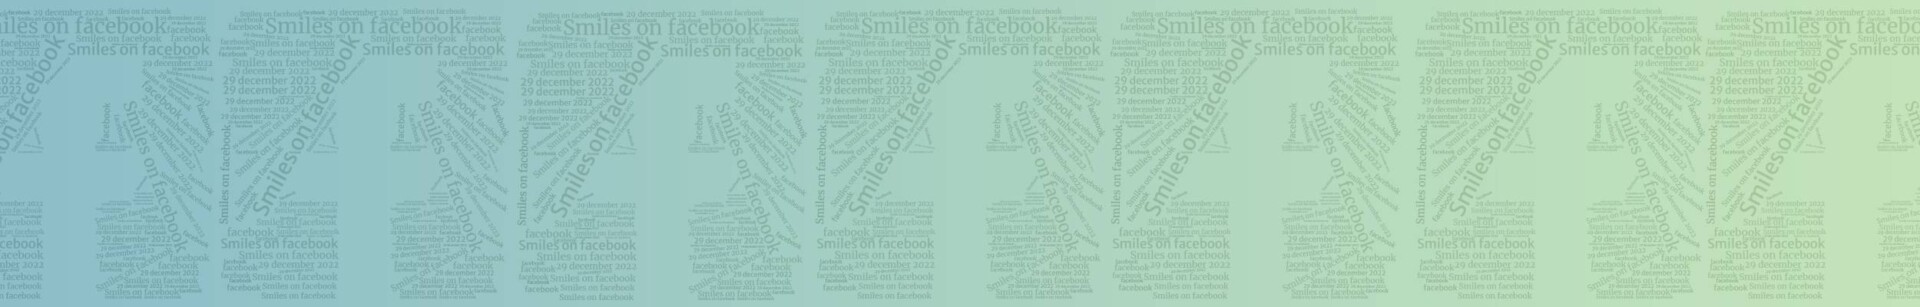 SMILE on facebook Featured image